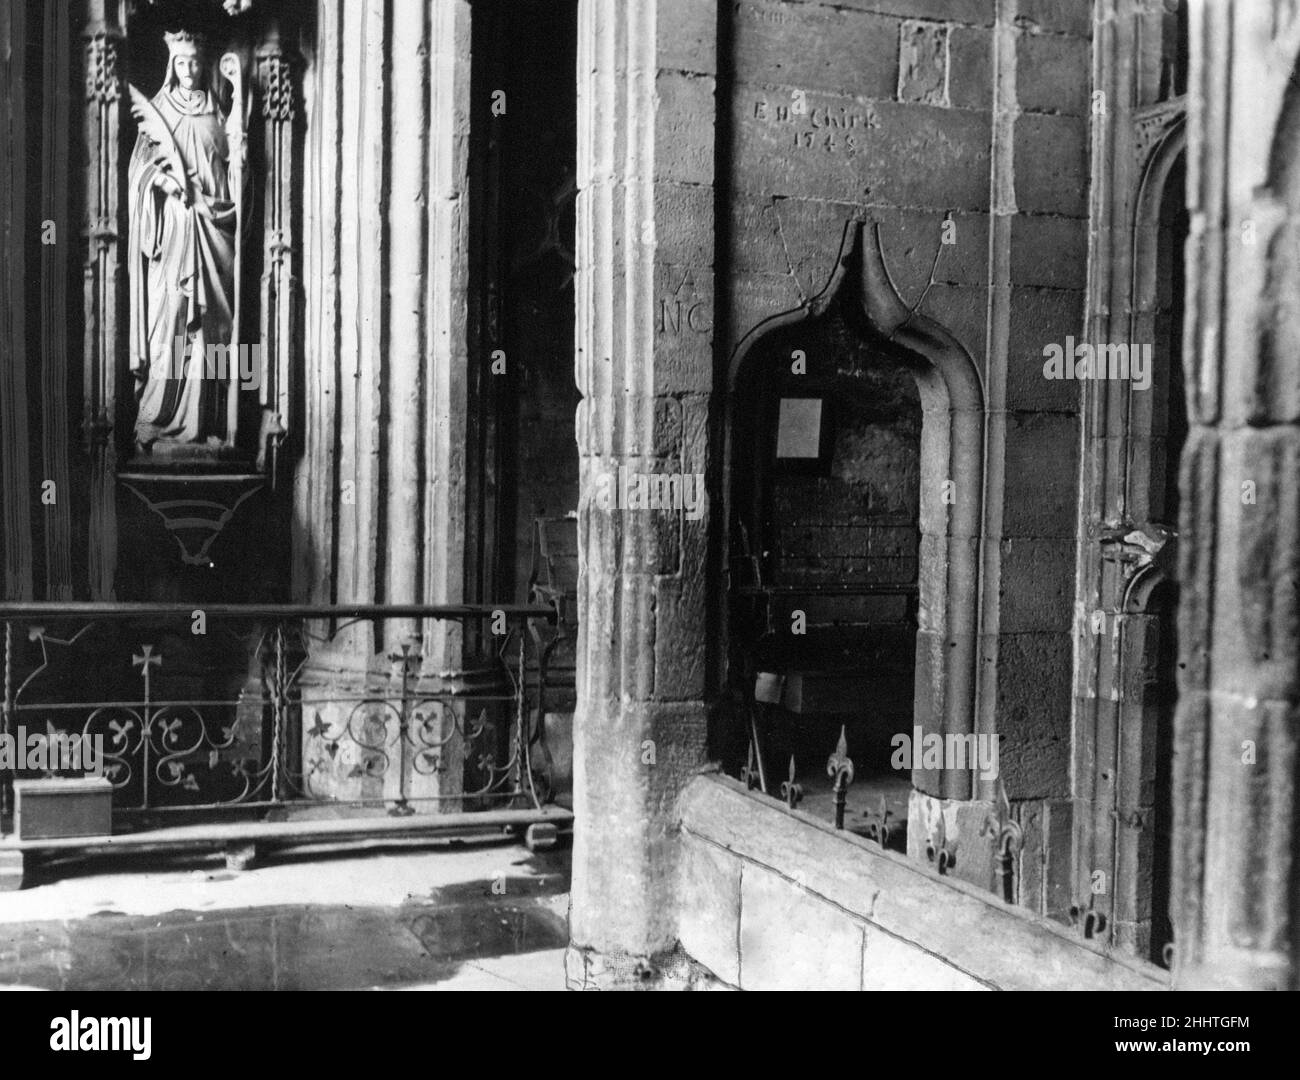 St Winefride's Well Shrine in Holywell, Flintshire, Wales, 28th December 1948. Our Picture Shows ... interior view of shrine, showing the statue of St Winefride and the entrance to the ladies bath.  Also know as Winifred's Well, it claims to be the oldest continually visited pilgrimage site in Great Britain (over 1300 years) and is a grade I listed building.   Pilgrims have visited St Winefride's Well throughout its history, to seek healing. Stock Photo